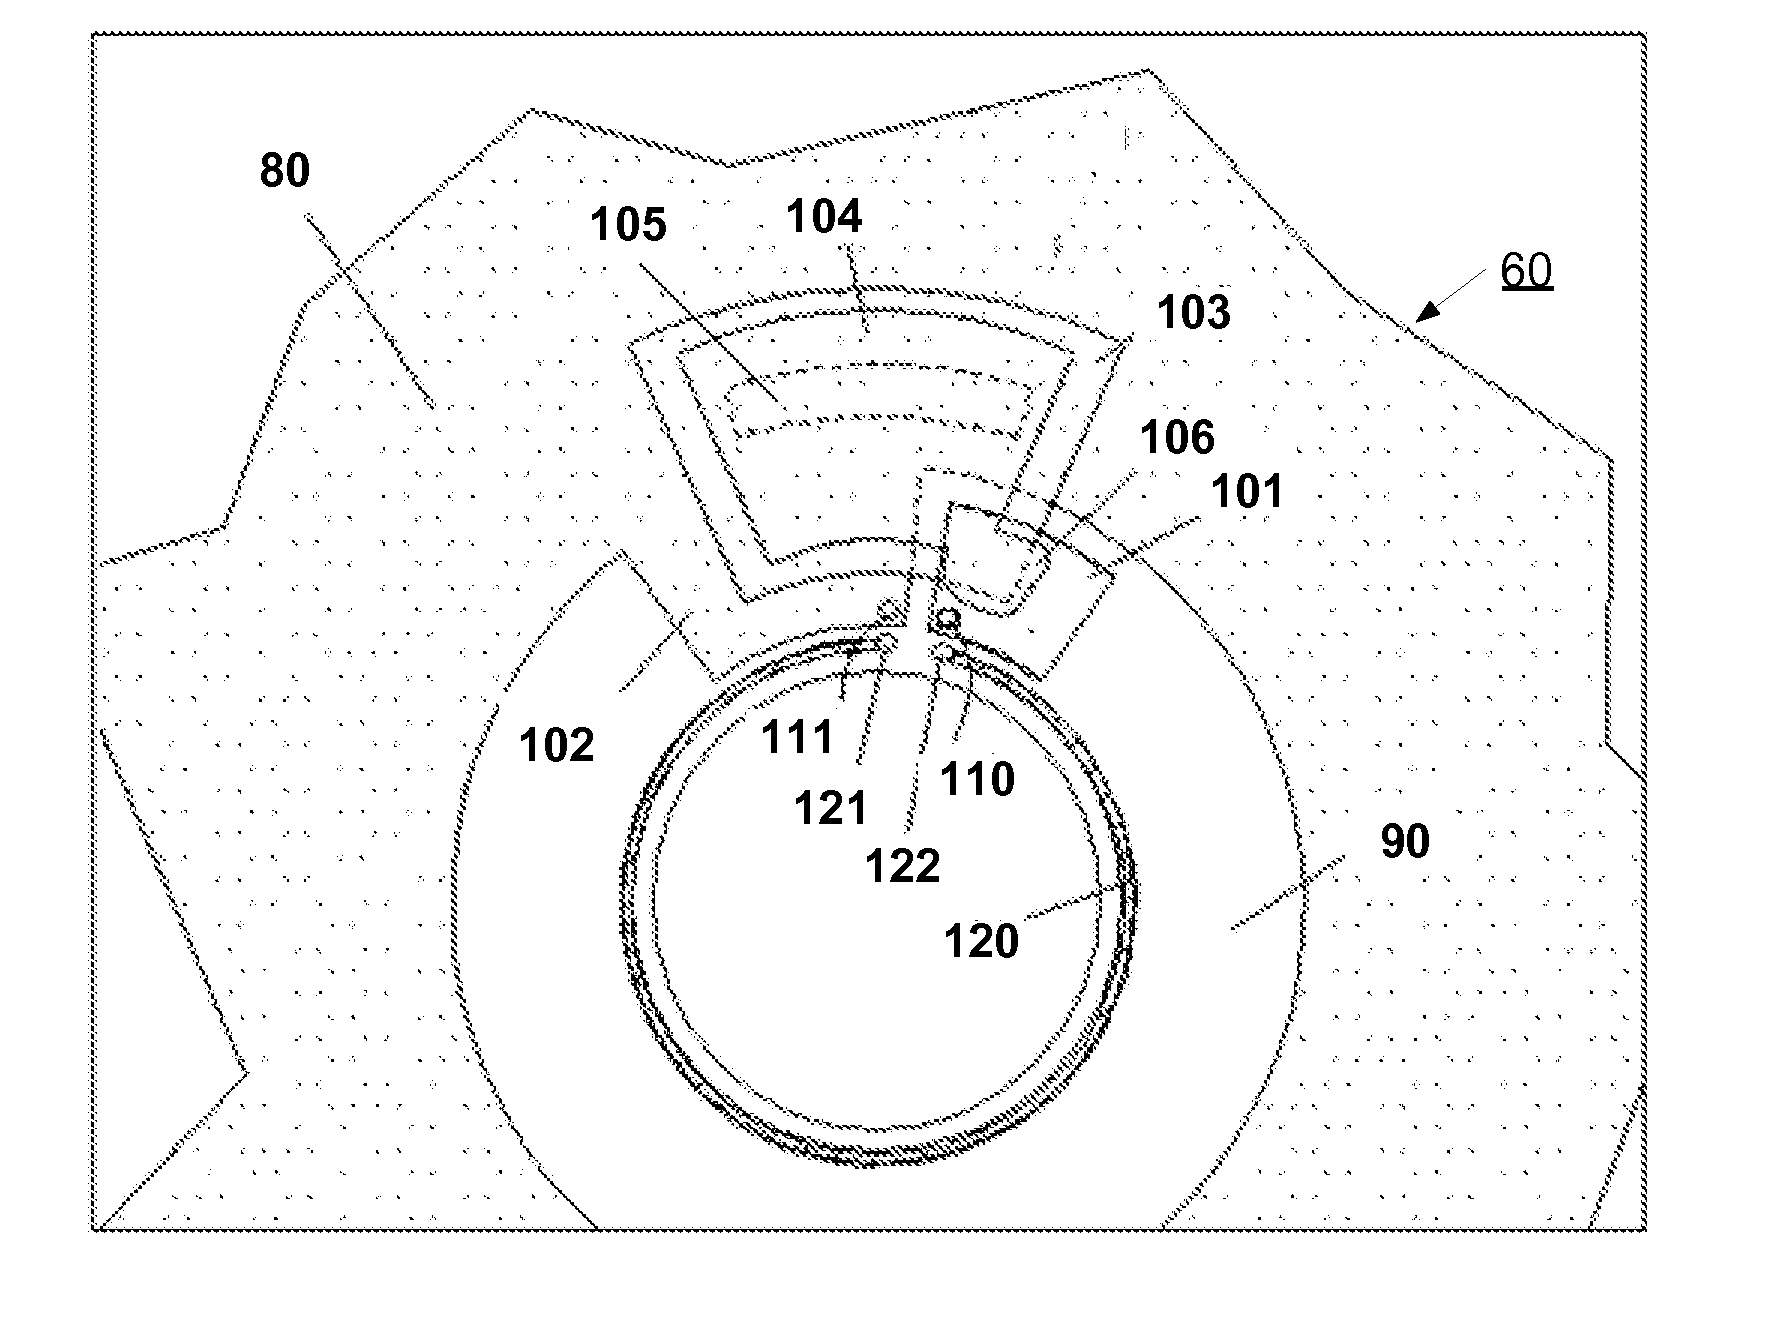 Structures and processes for controlling access to optical media